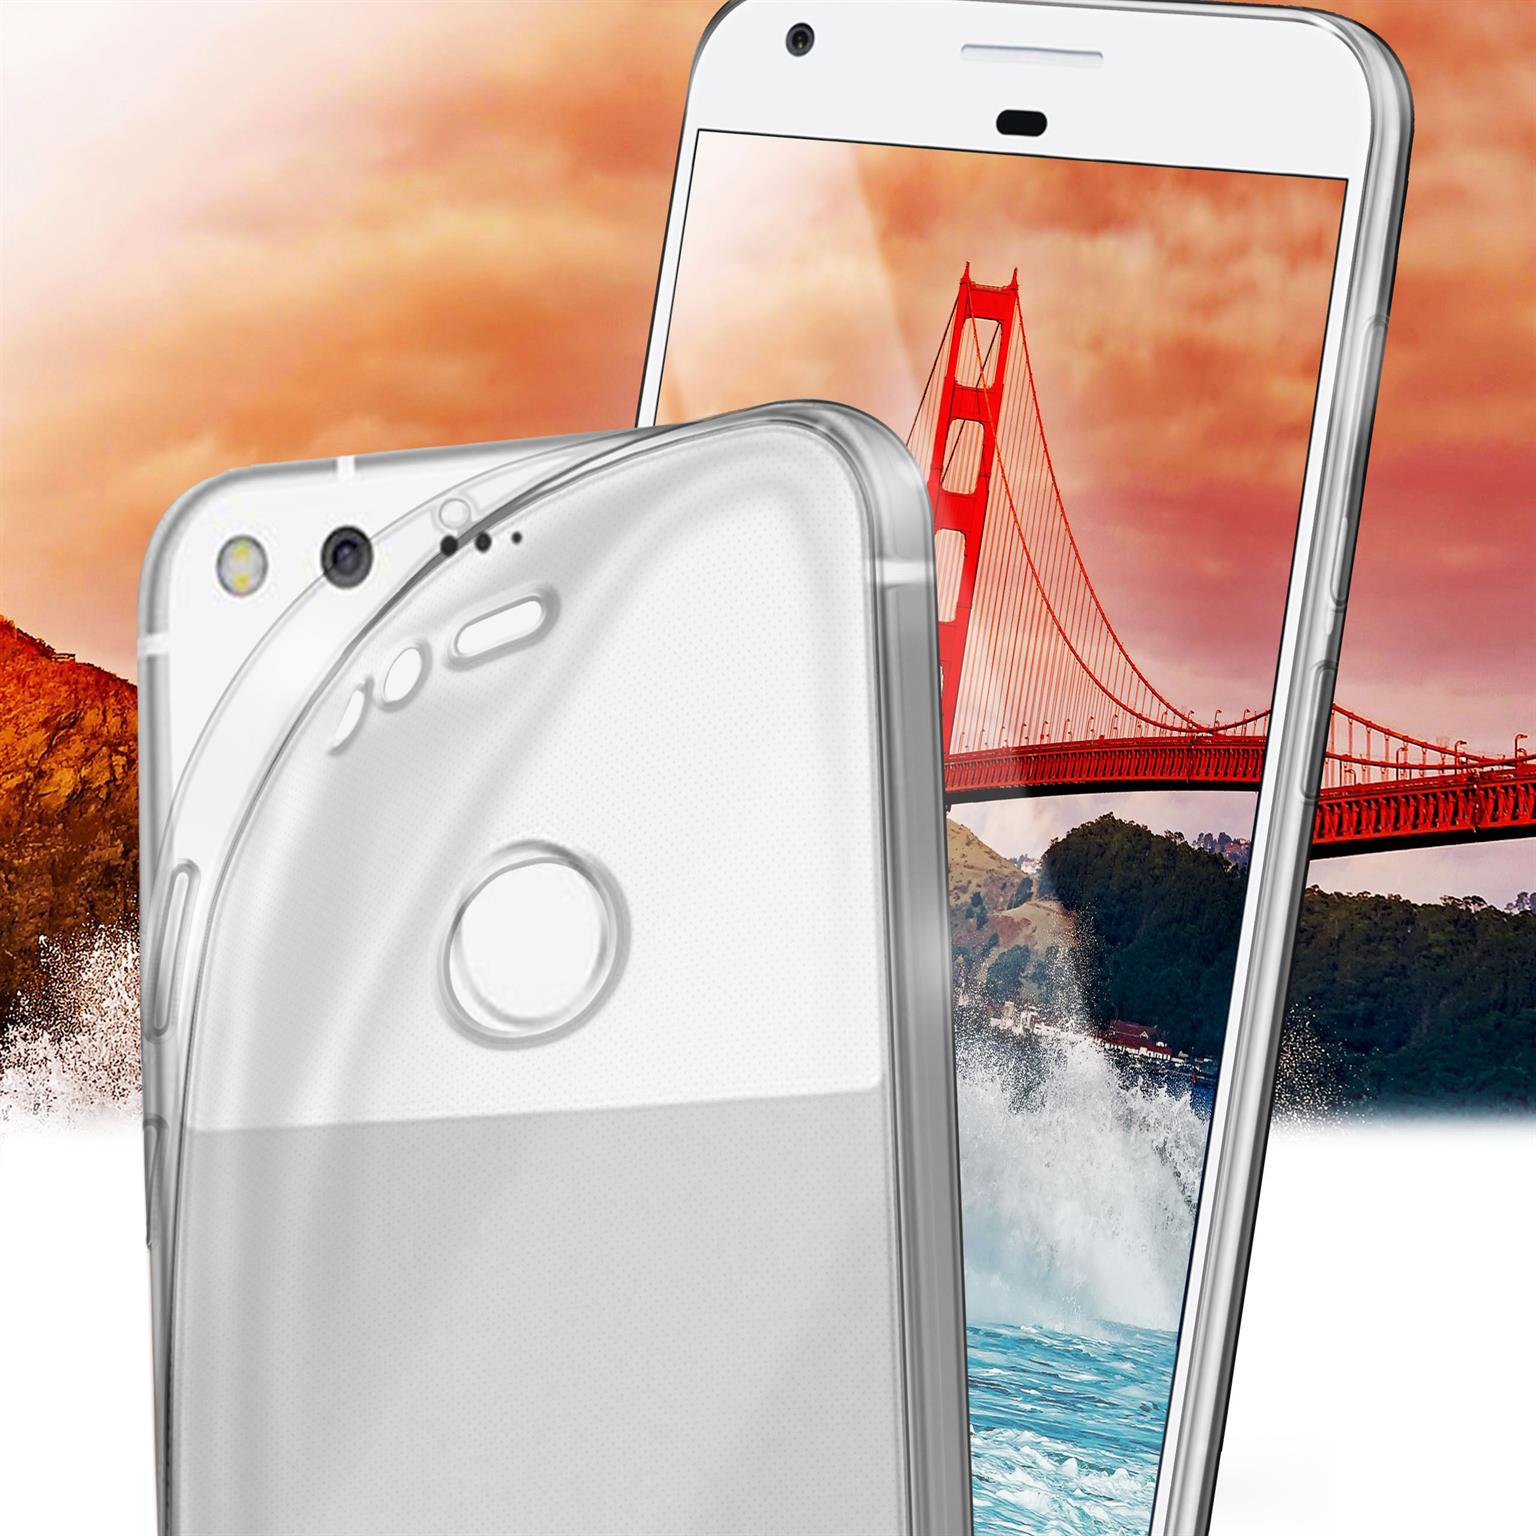 Case, Backcover, Crystal-Clear Aero Pixel, Google, MOEX